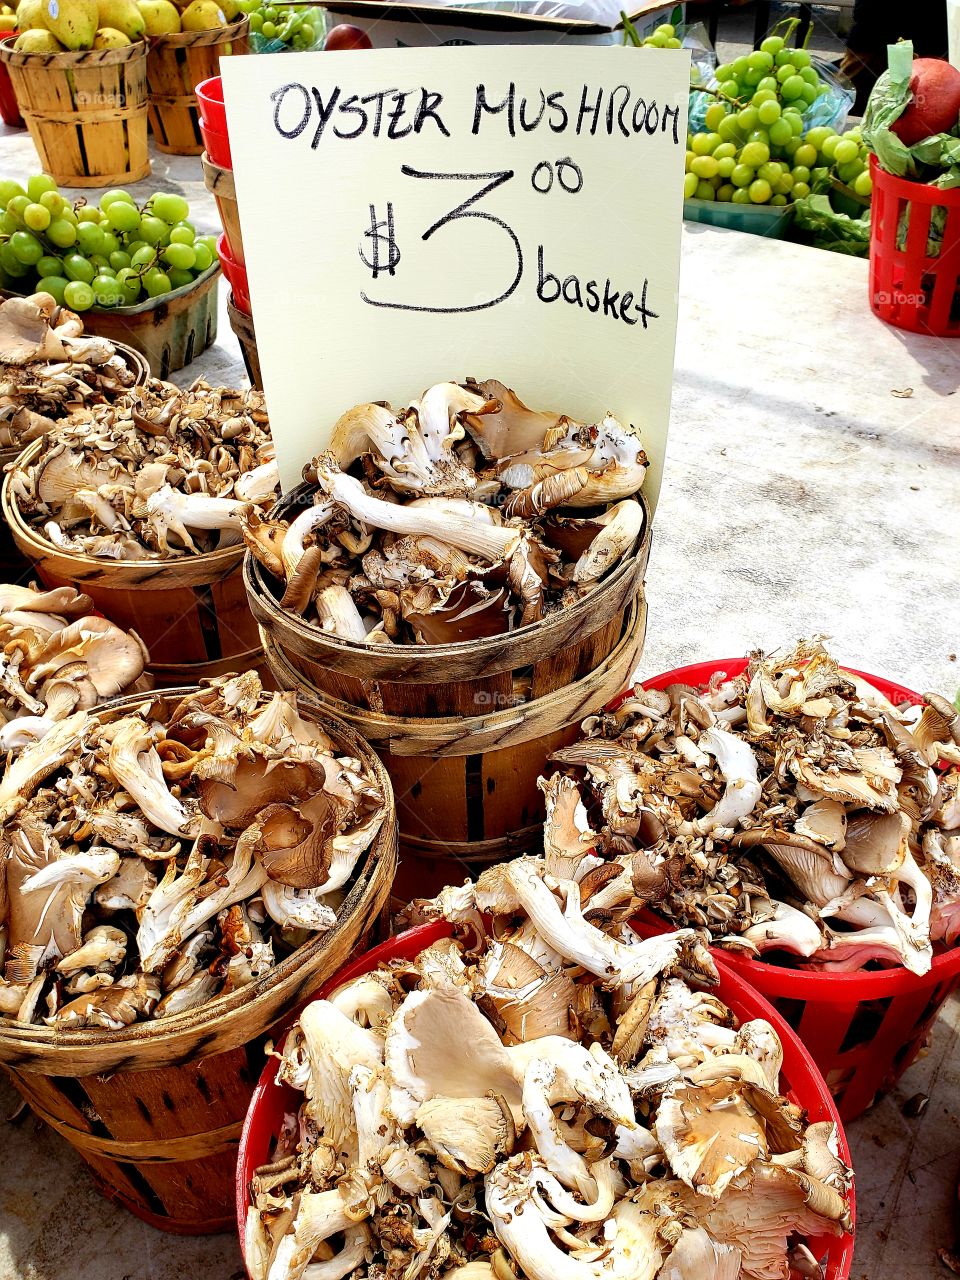 Baskets of oyster mushrooms at a farmers market